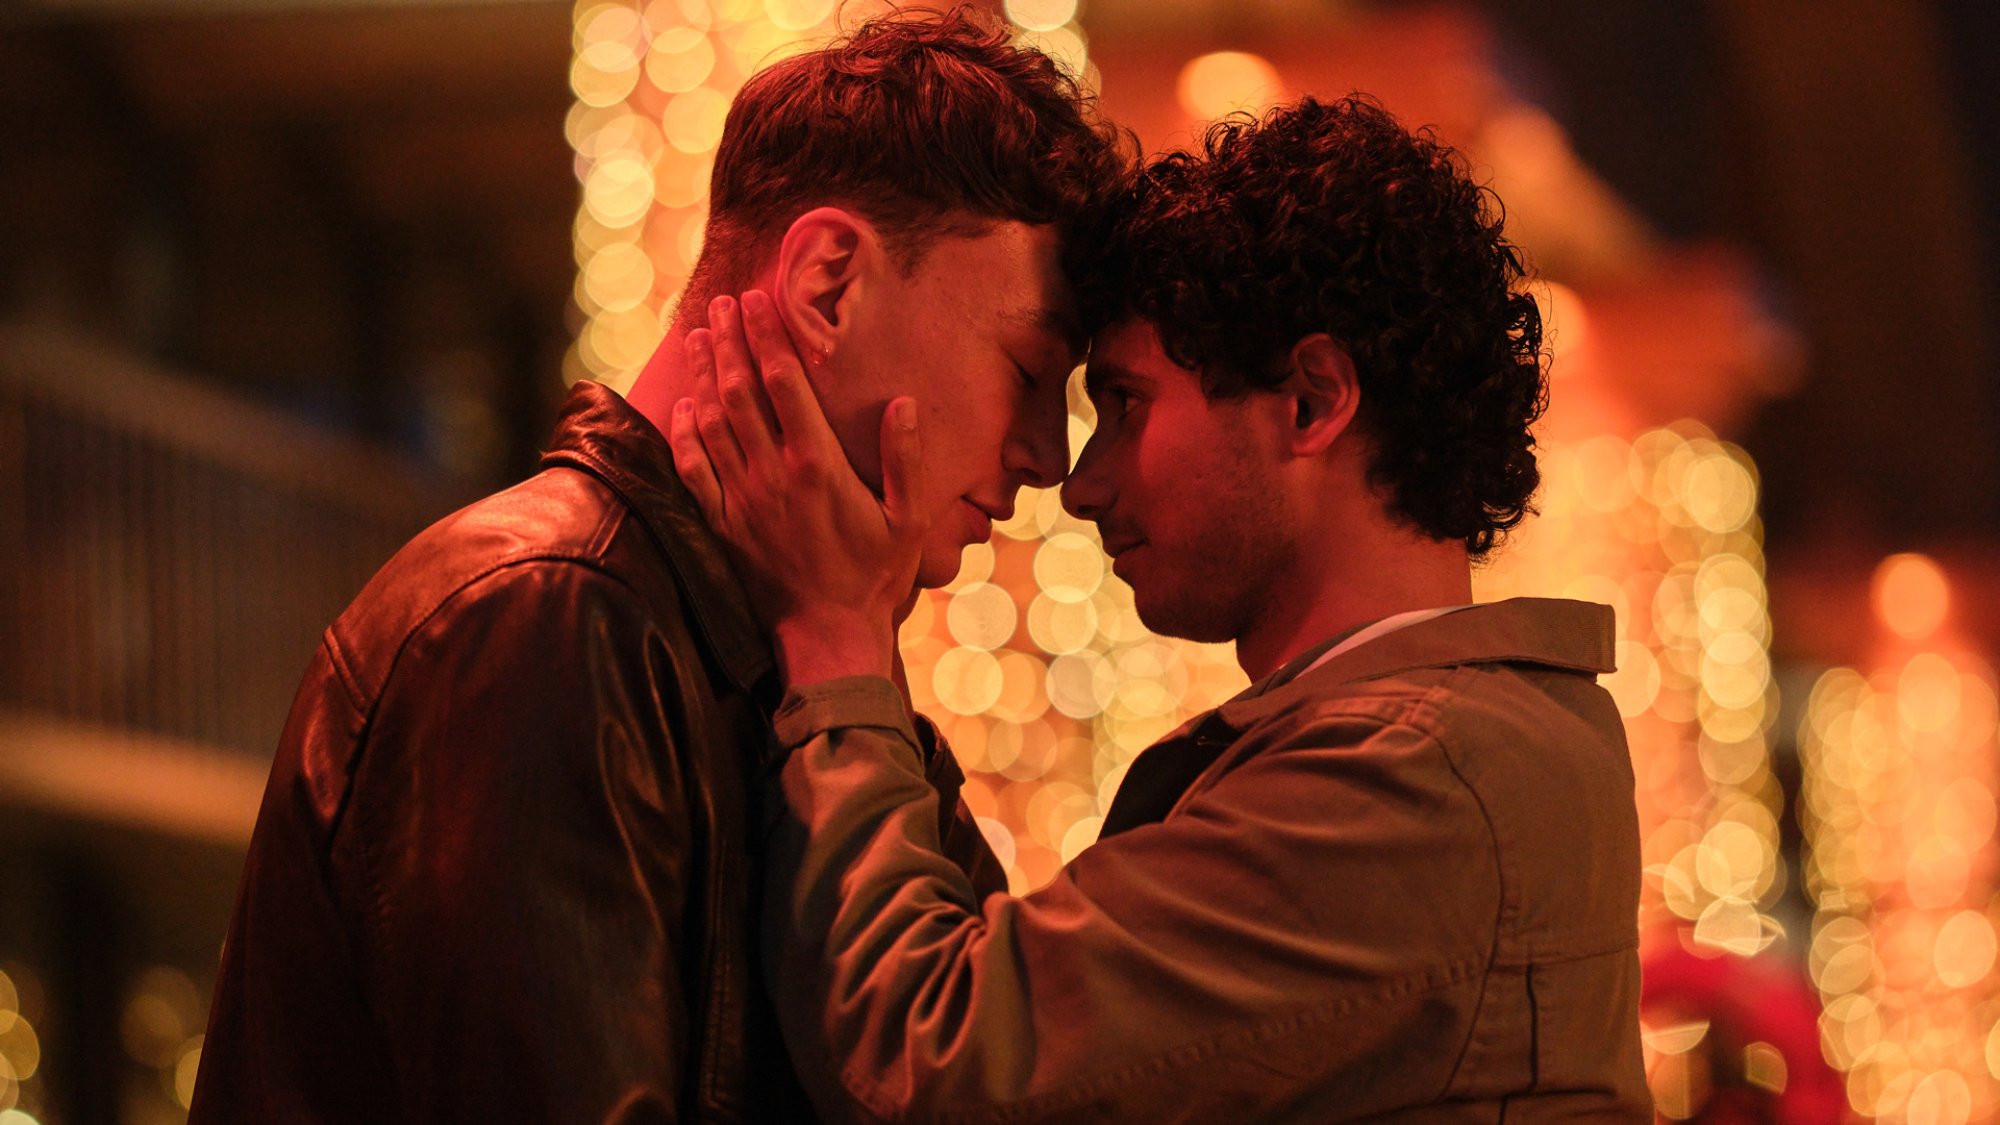 Marcus Hodson and Bilal Hasna touch foreheads in a romantic moment in "Dead Hot."